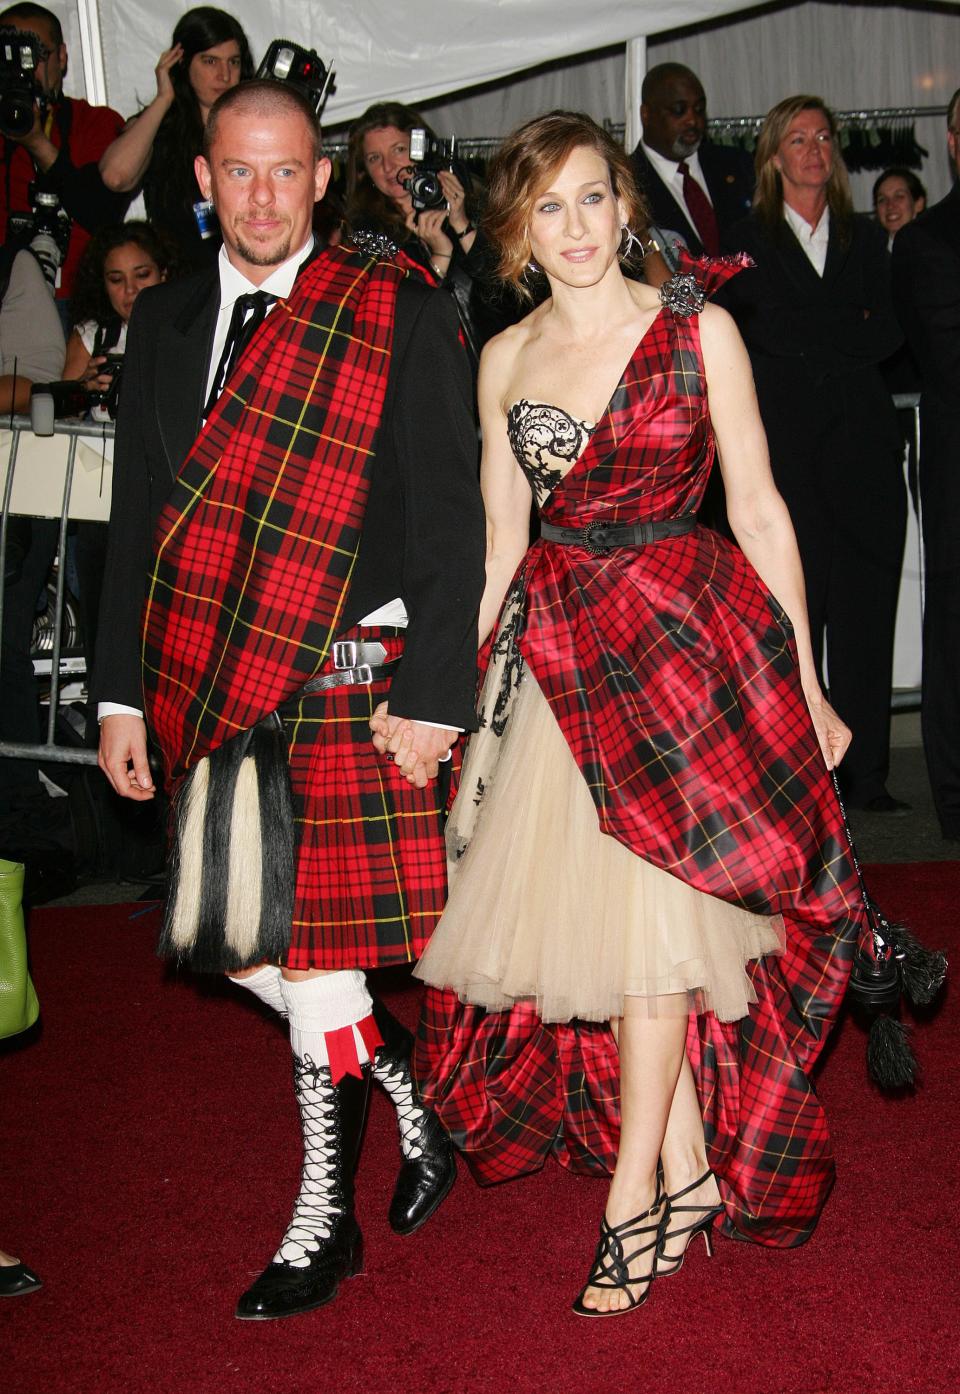 <p> For the "AngloMania: Tradition and Transgression in British Fashion" Met Gala, Sarah Jessica Parker said she screwed up her courage to ask if the designer of her gown, the late Alexander McQueen, would attend with her. He said yes, creating this iconic matching plaid look. Parker later noted in a <em>Vogue</em> video that the designer was incredibly shy, and that she was trying to be attentive to him. "It wasn't a fun night. Like, it was, but it wasn't because I was so nervous. I just wanted him to be OK." </p>